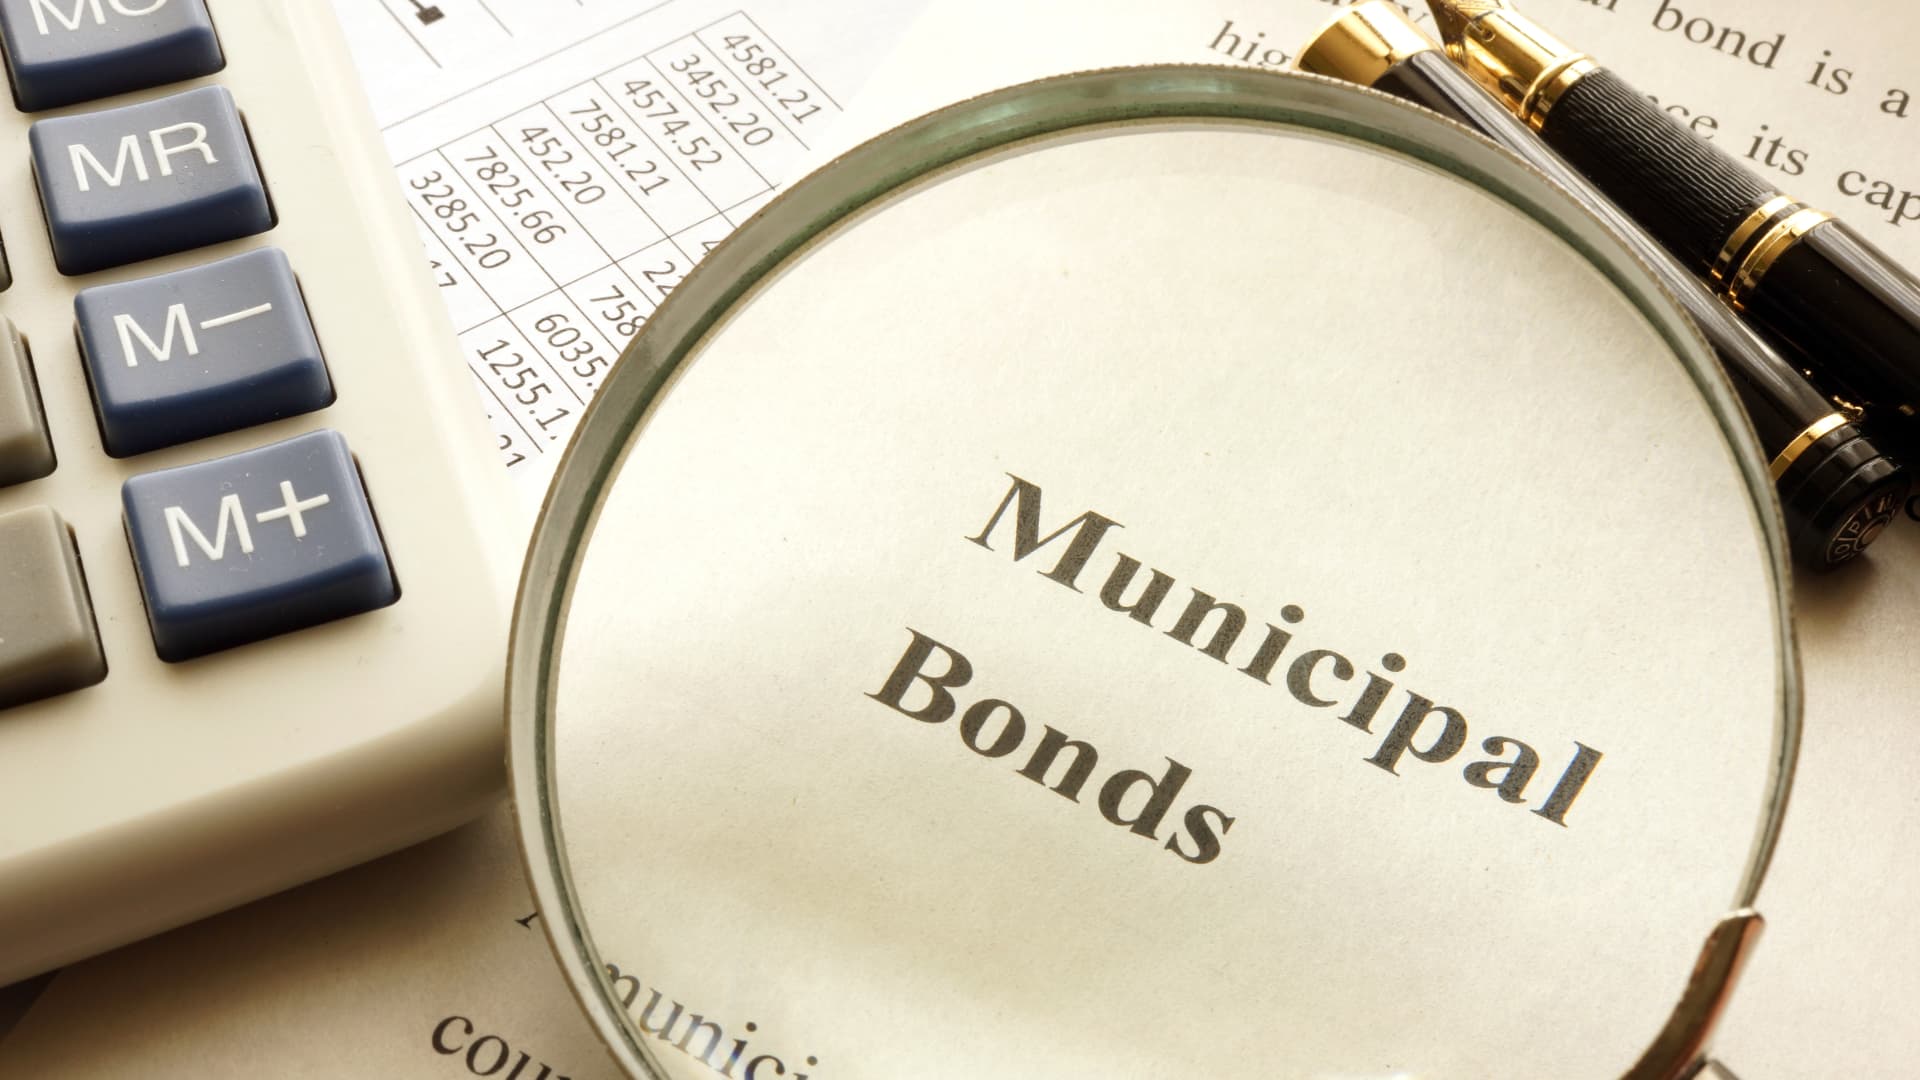 Cash is pouring into municipal bond ETFs. Here’s why they could be winners for investors